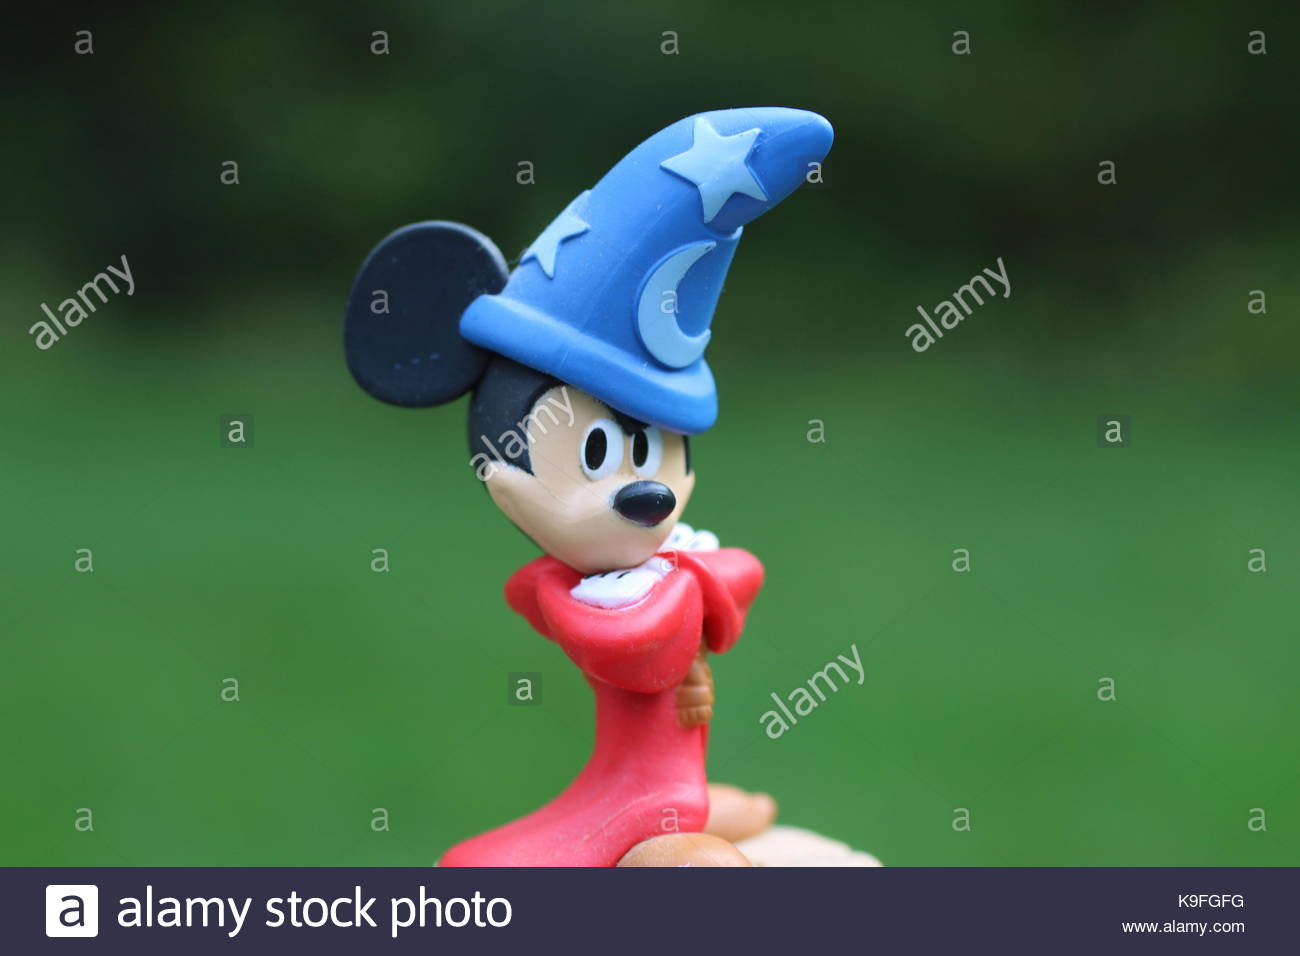 Mickey Mouse Hat High Resolution Stock Photography and Images - Alamy